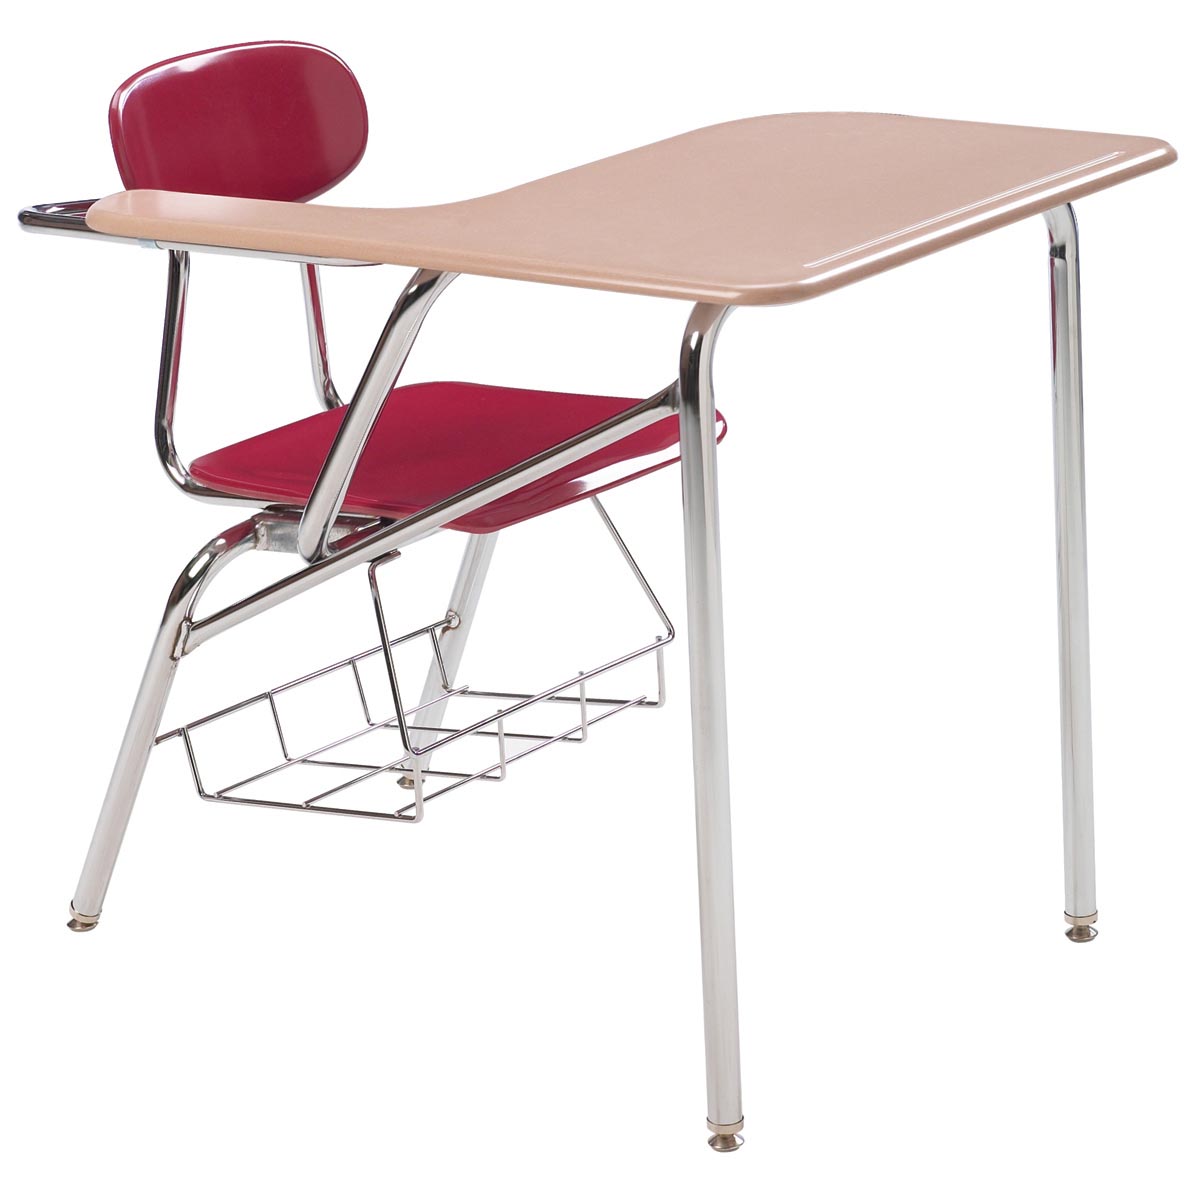 Tablet Arm Desk with WoodStone Top - 14" Seat Height - Cranberry Seat/Beige Woodstone Top